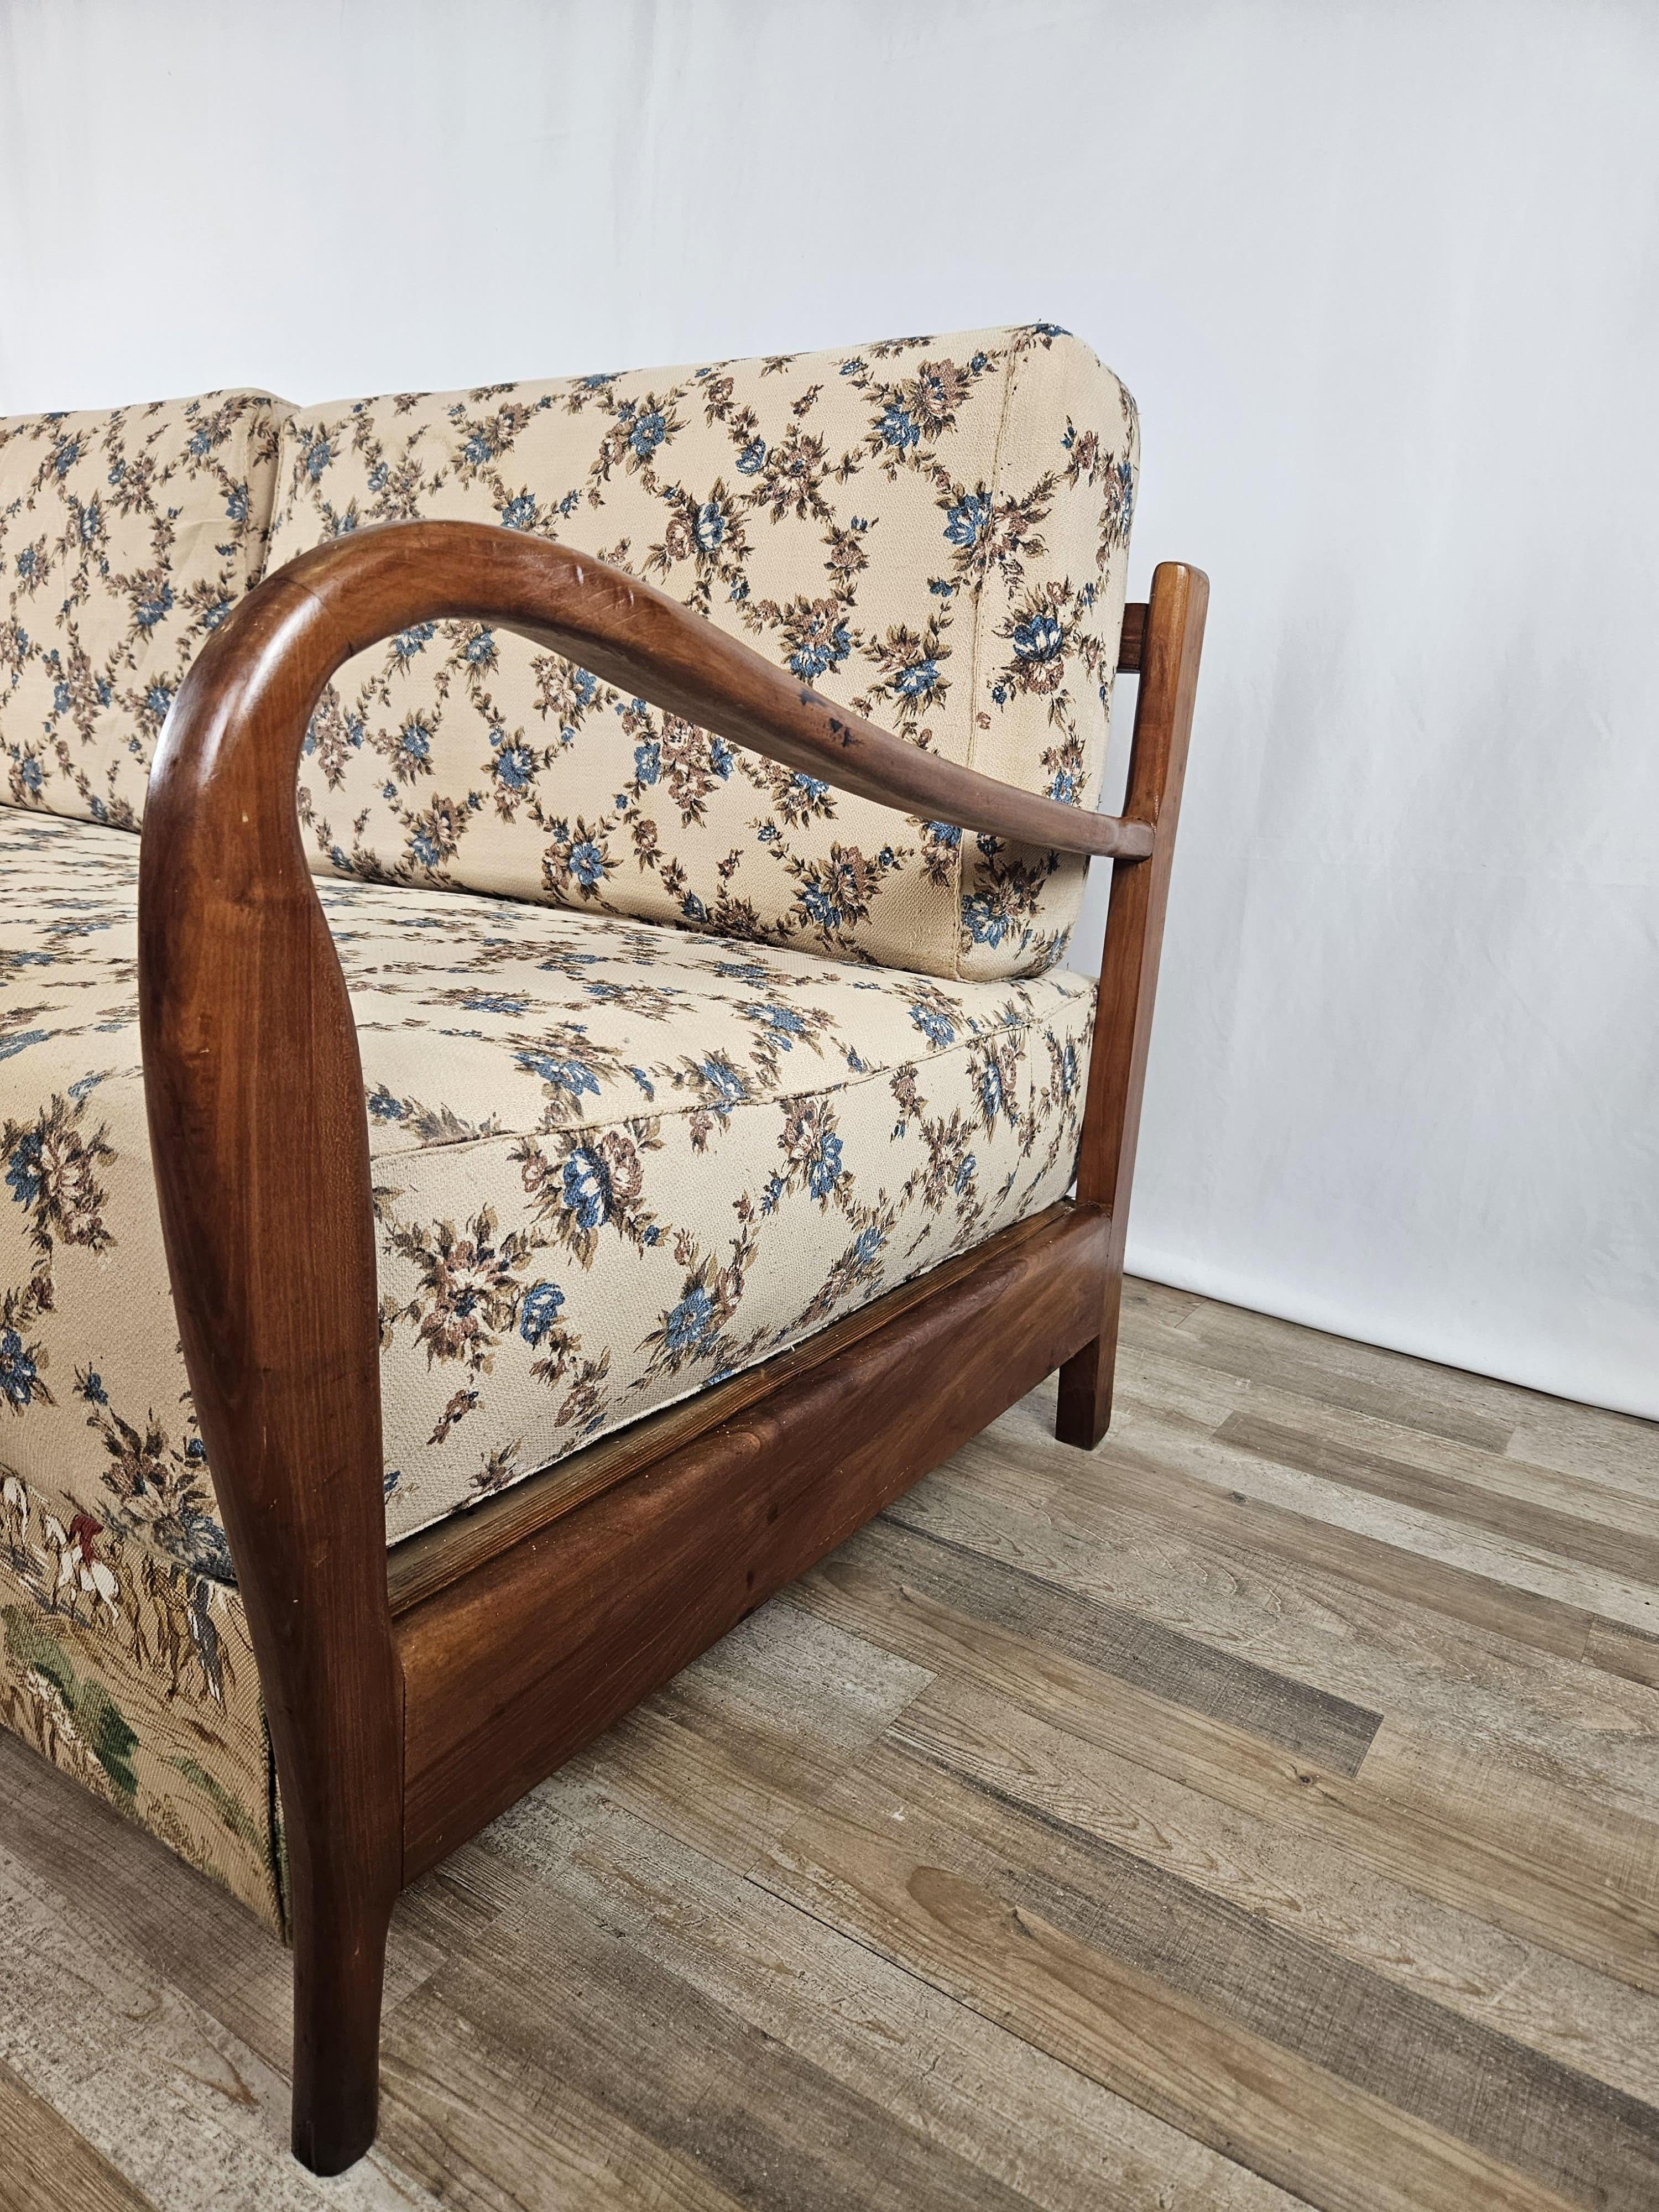 Dormeuse with beechwood frame and upholstery covered in original fabric from the early 1950s.

Multifunctional piece of furniture, with restrained lines and ideal proportions to be combined with any kind of environment.

The frame widens laterally